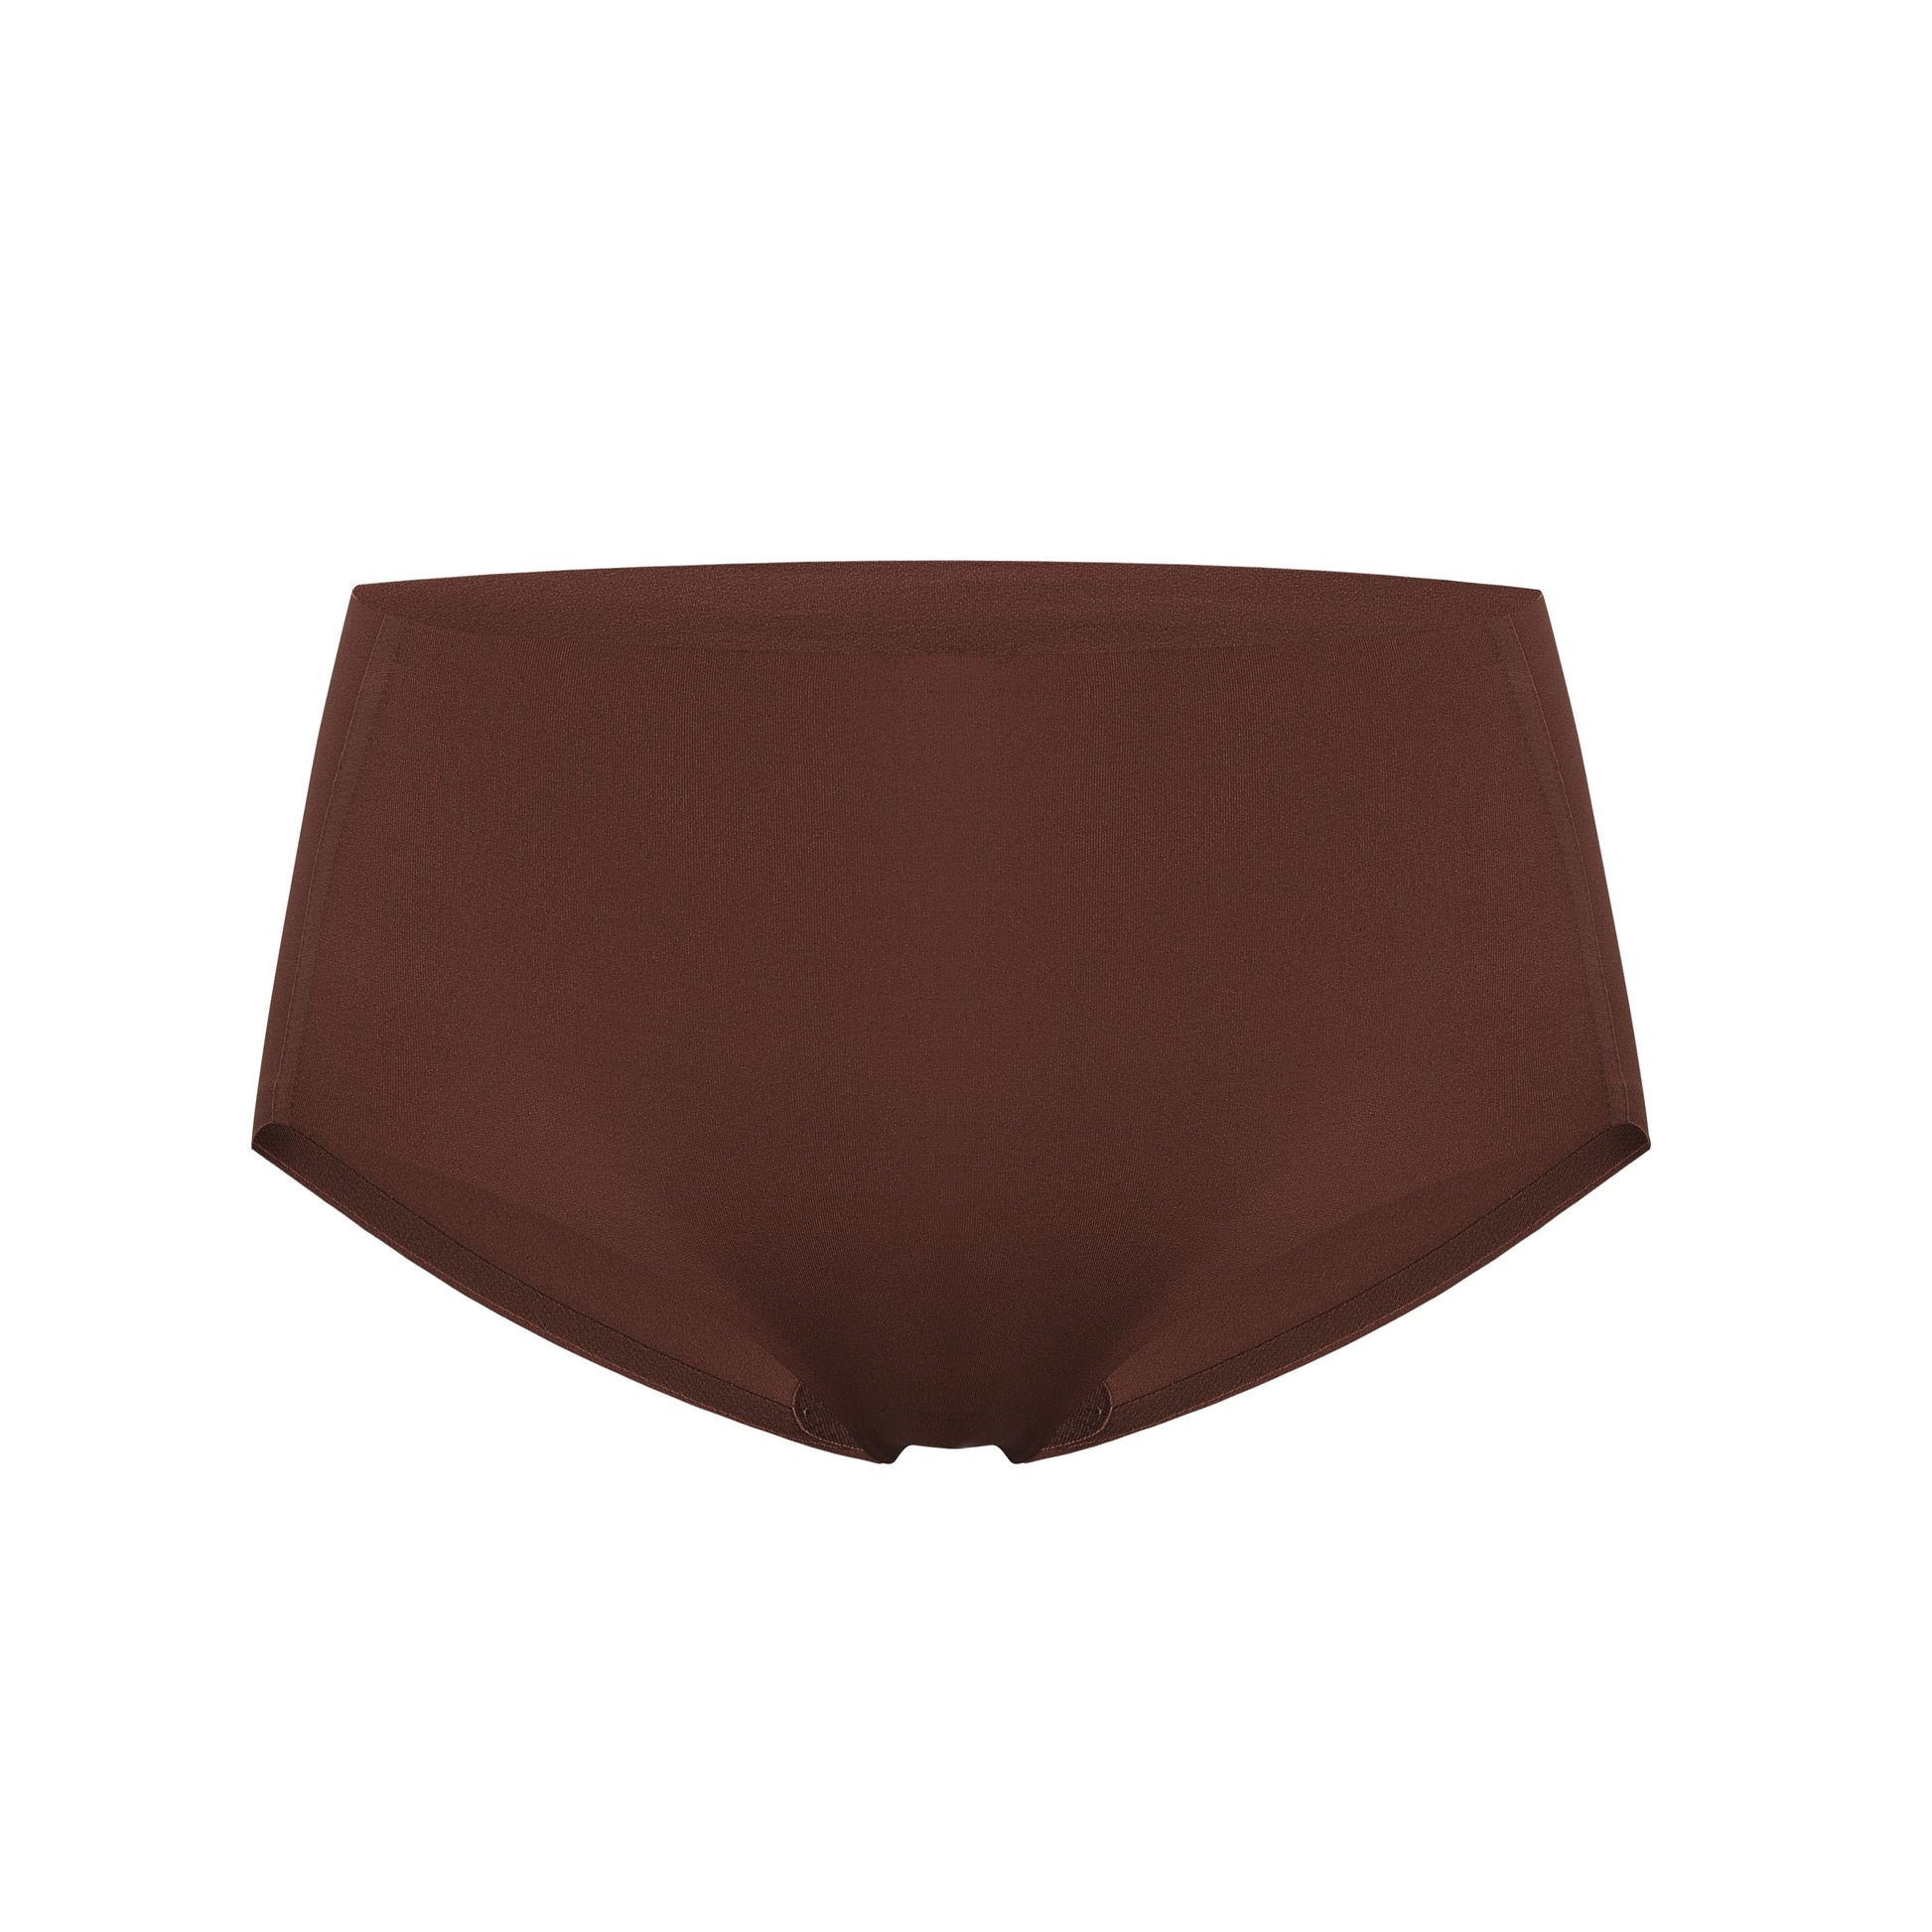 Barely There Briefs- brown